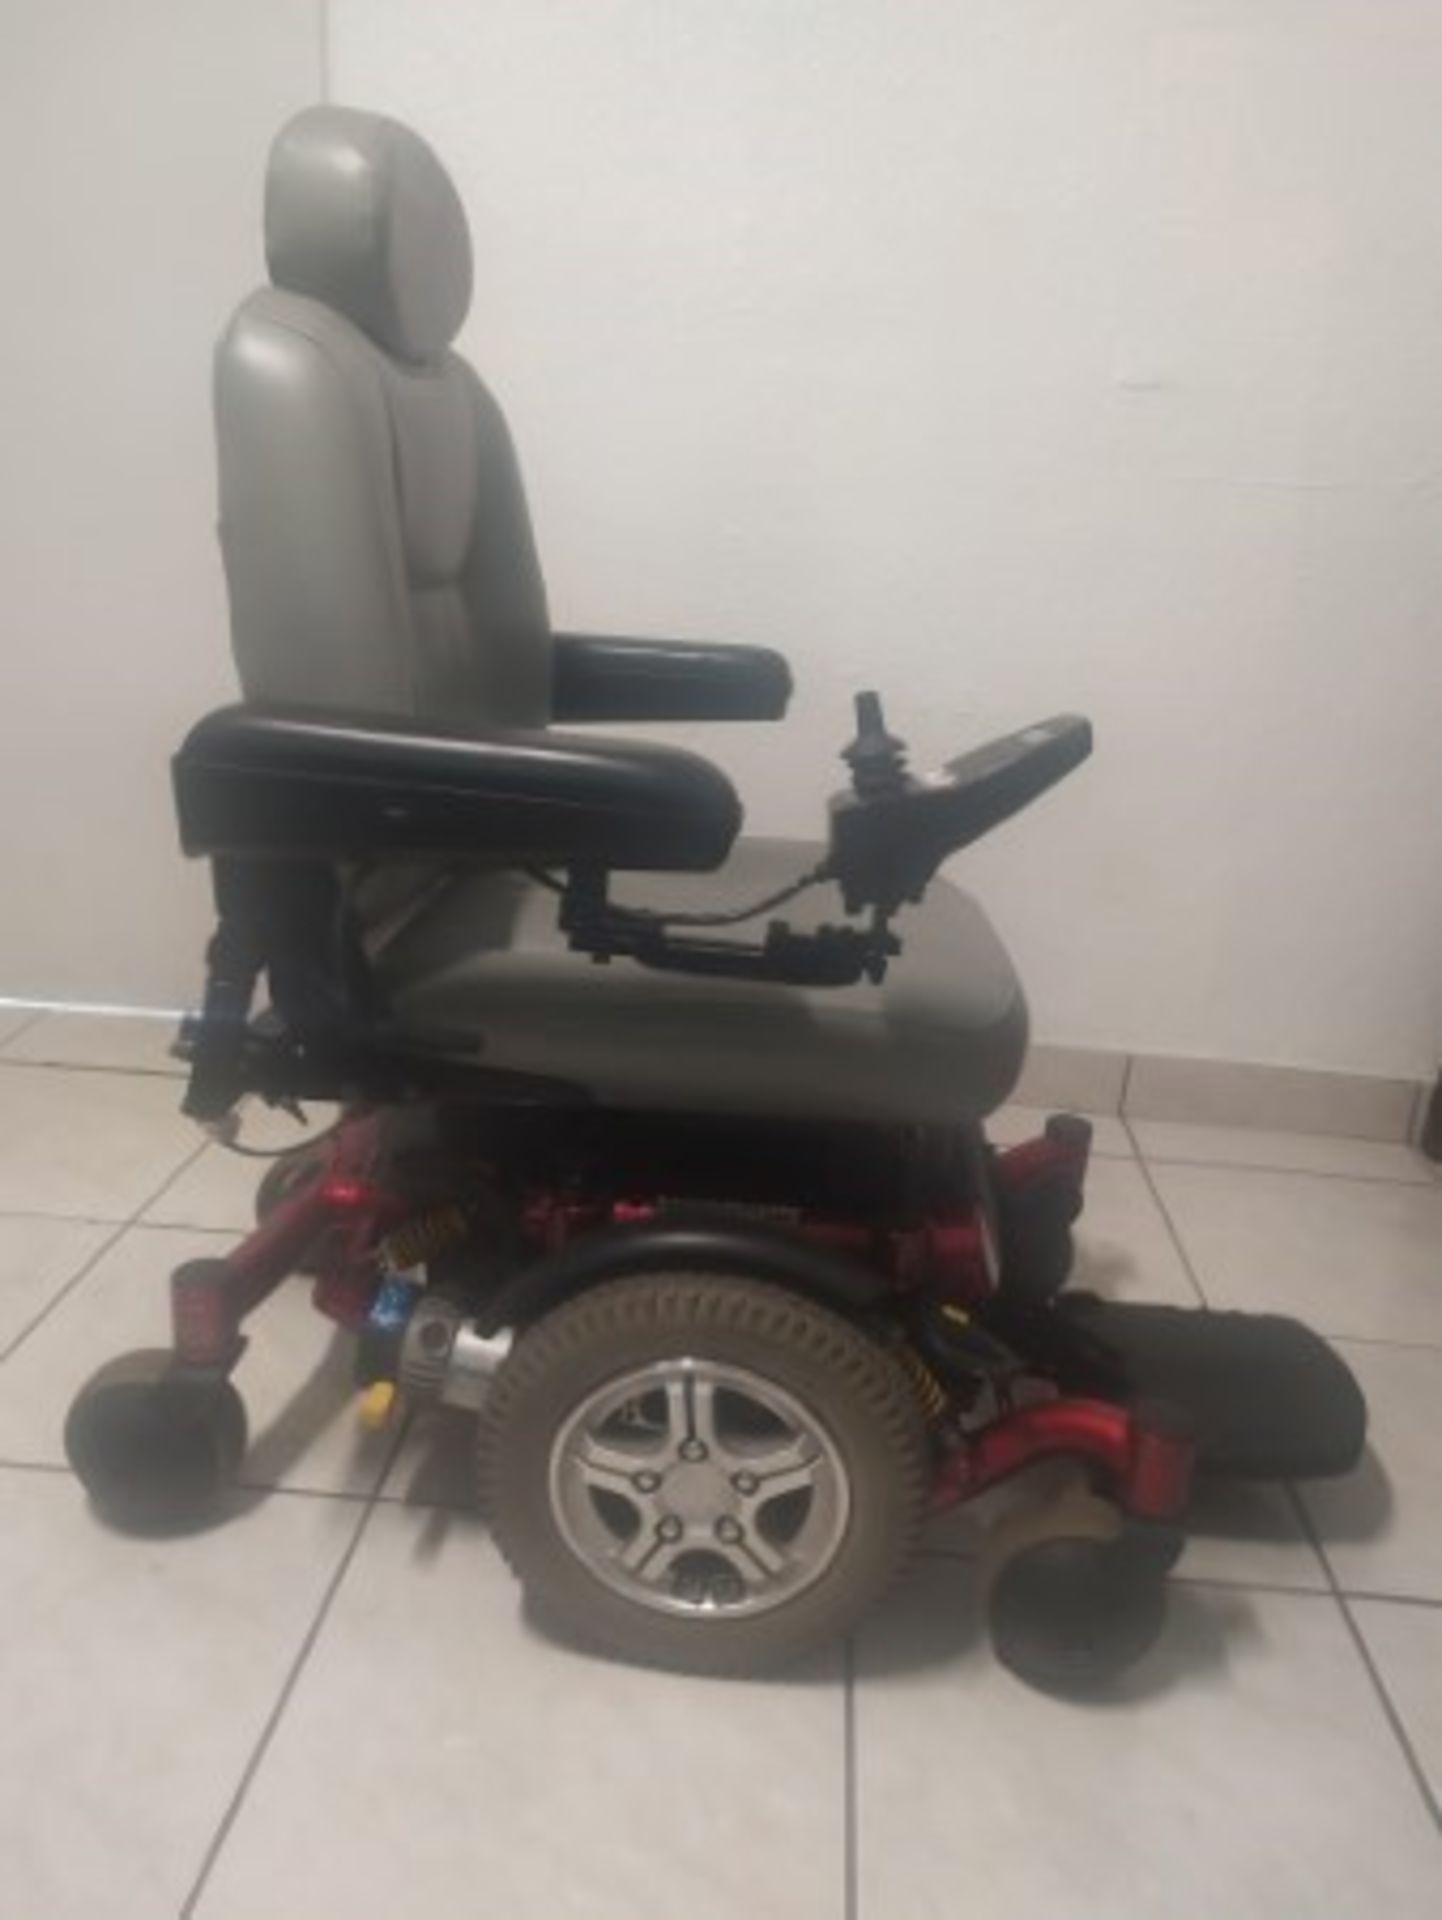 2013 QUANTUM 6000Z 6-WHEEL POWER CHAIR WITH JOYSTICK CONTROL - RED - 300LB CAPACITY - SERIAL No. 231 - Image 4 of 4